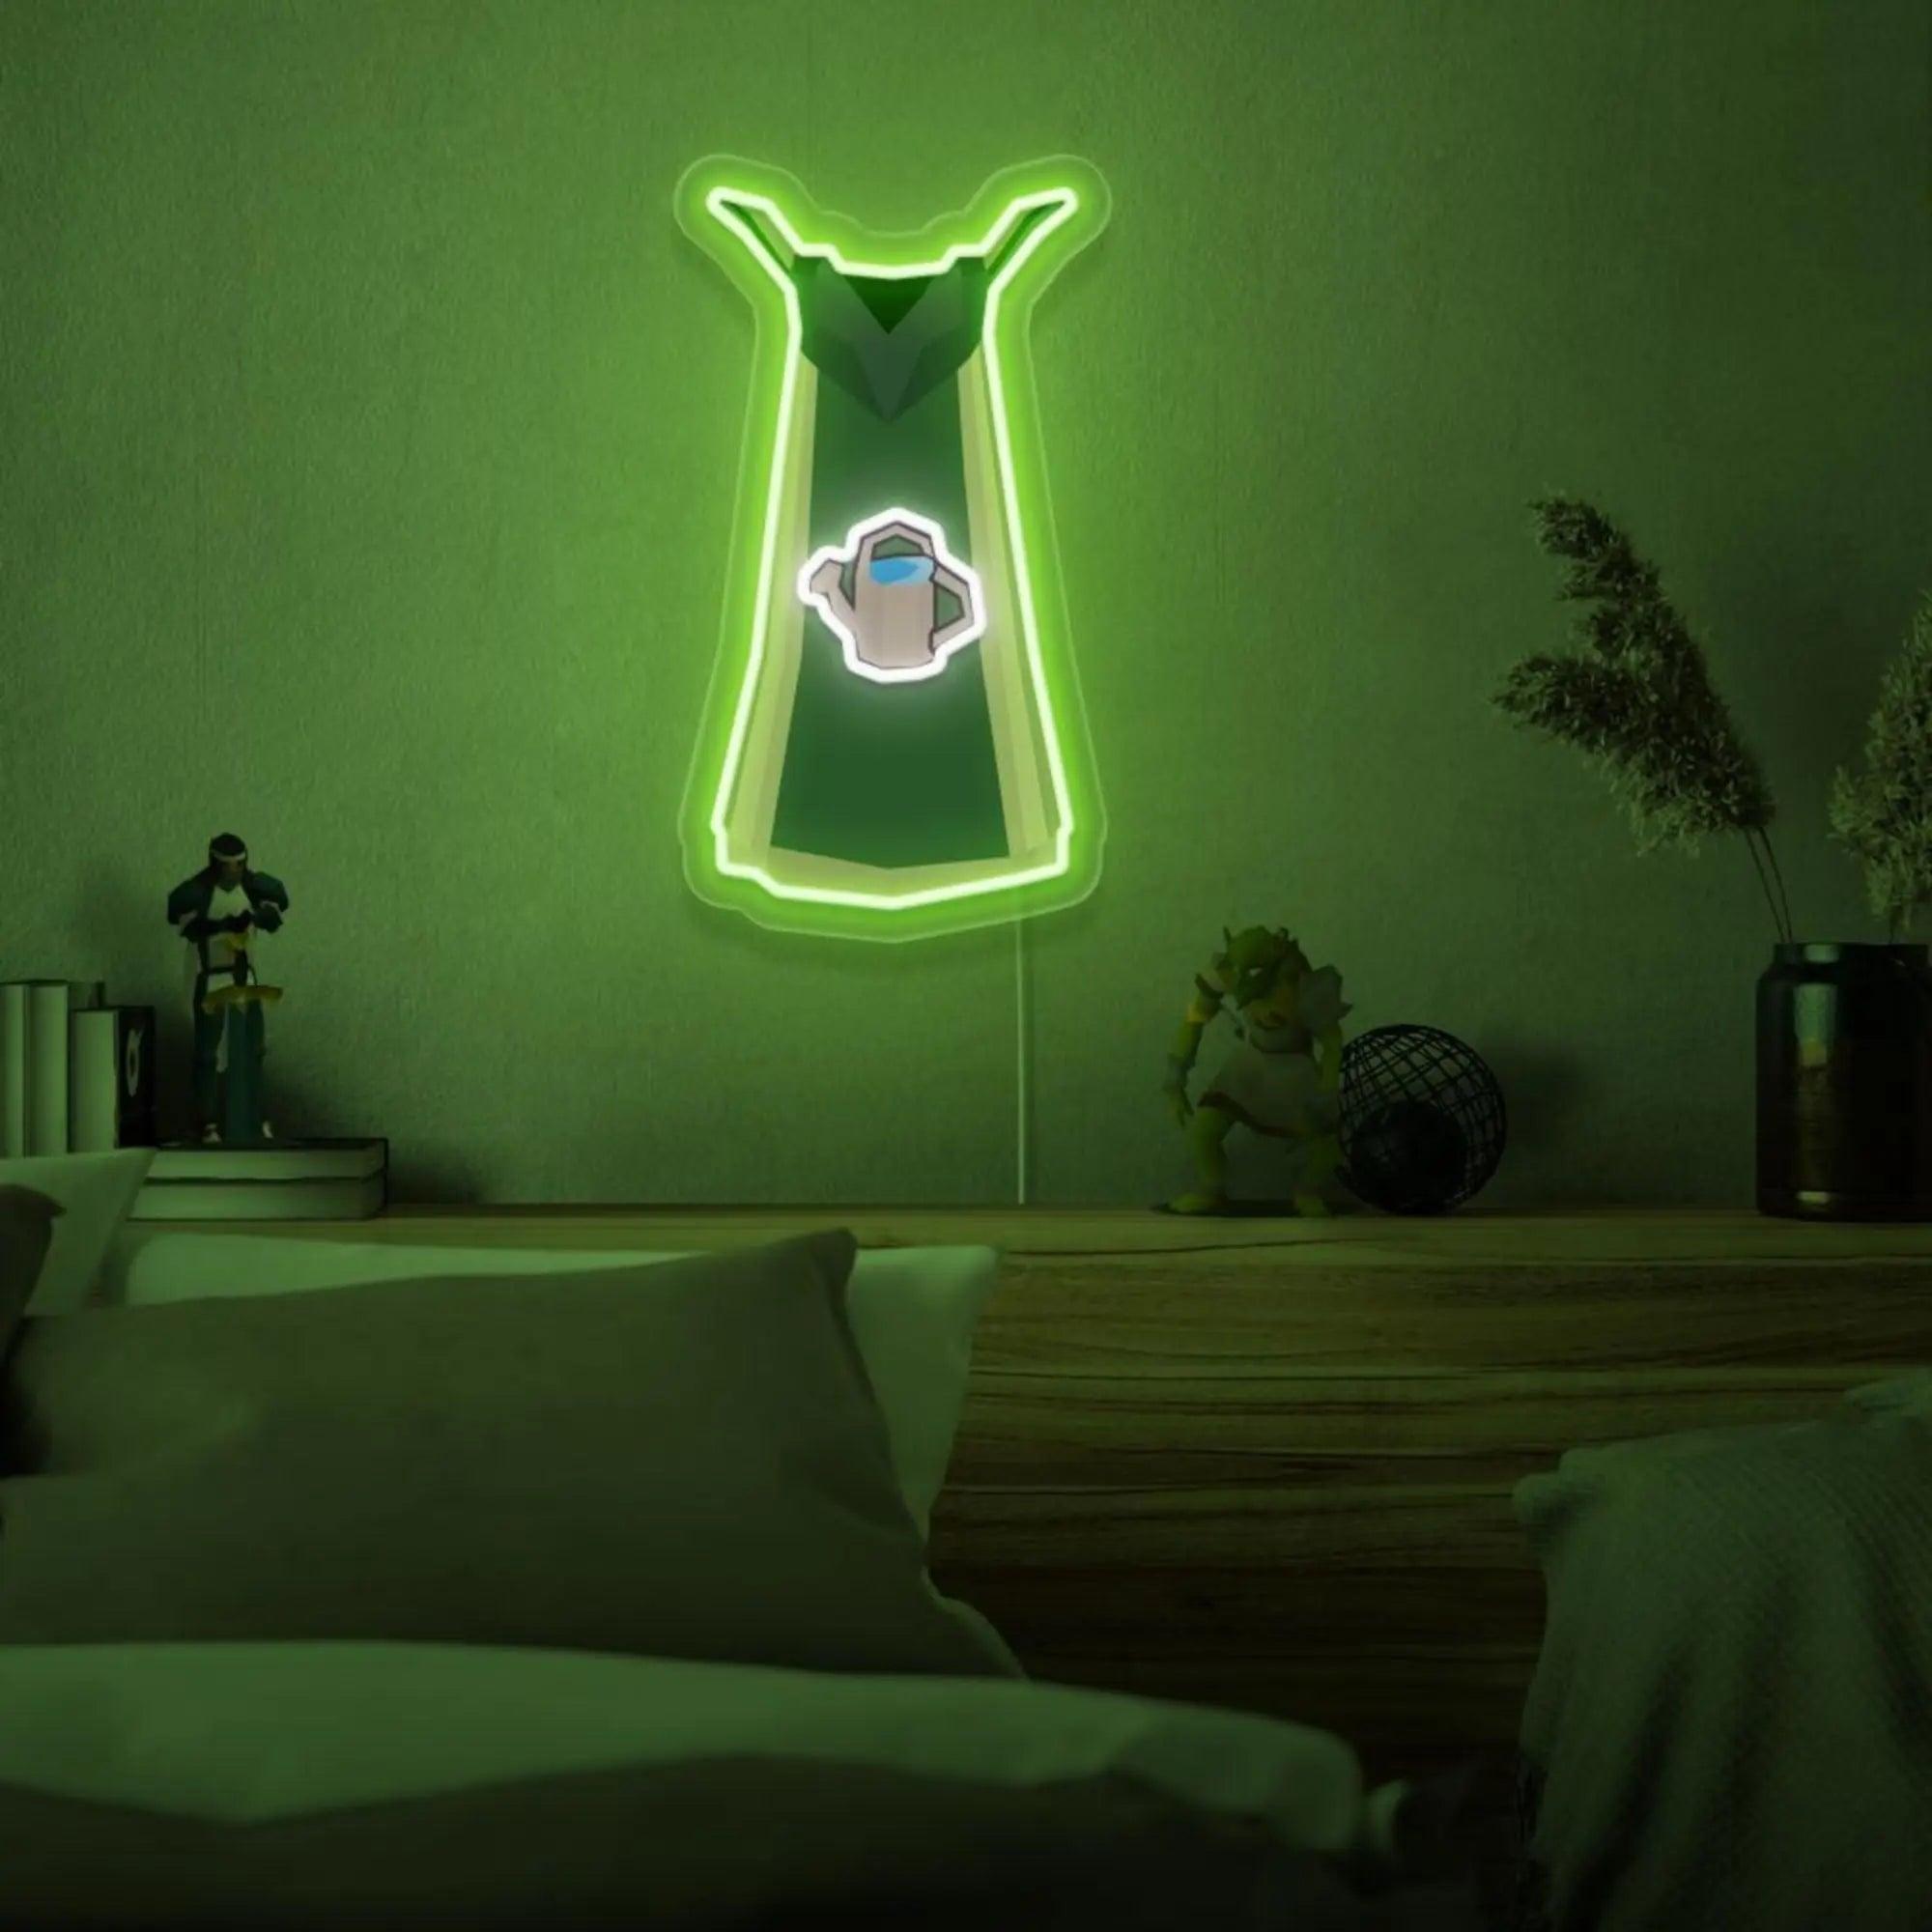 Mount the Runescape Farming Skillcape LED neon sign above your bed to infuse your bedroom with agricultural vibes. The iconic farming skill symbol from RuneScape adds a touch of tranquility and nature to your personal space, making it a unique and refreshing gift for Runescape enthusiasts.